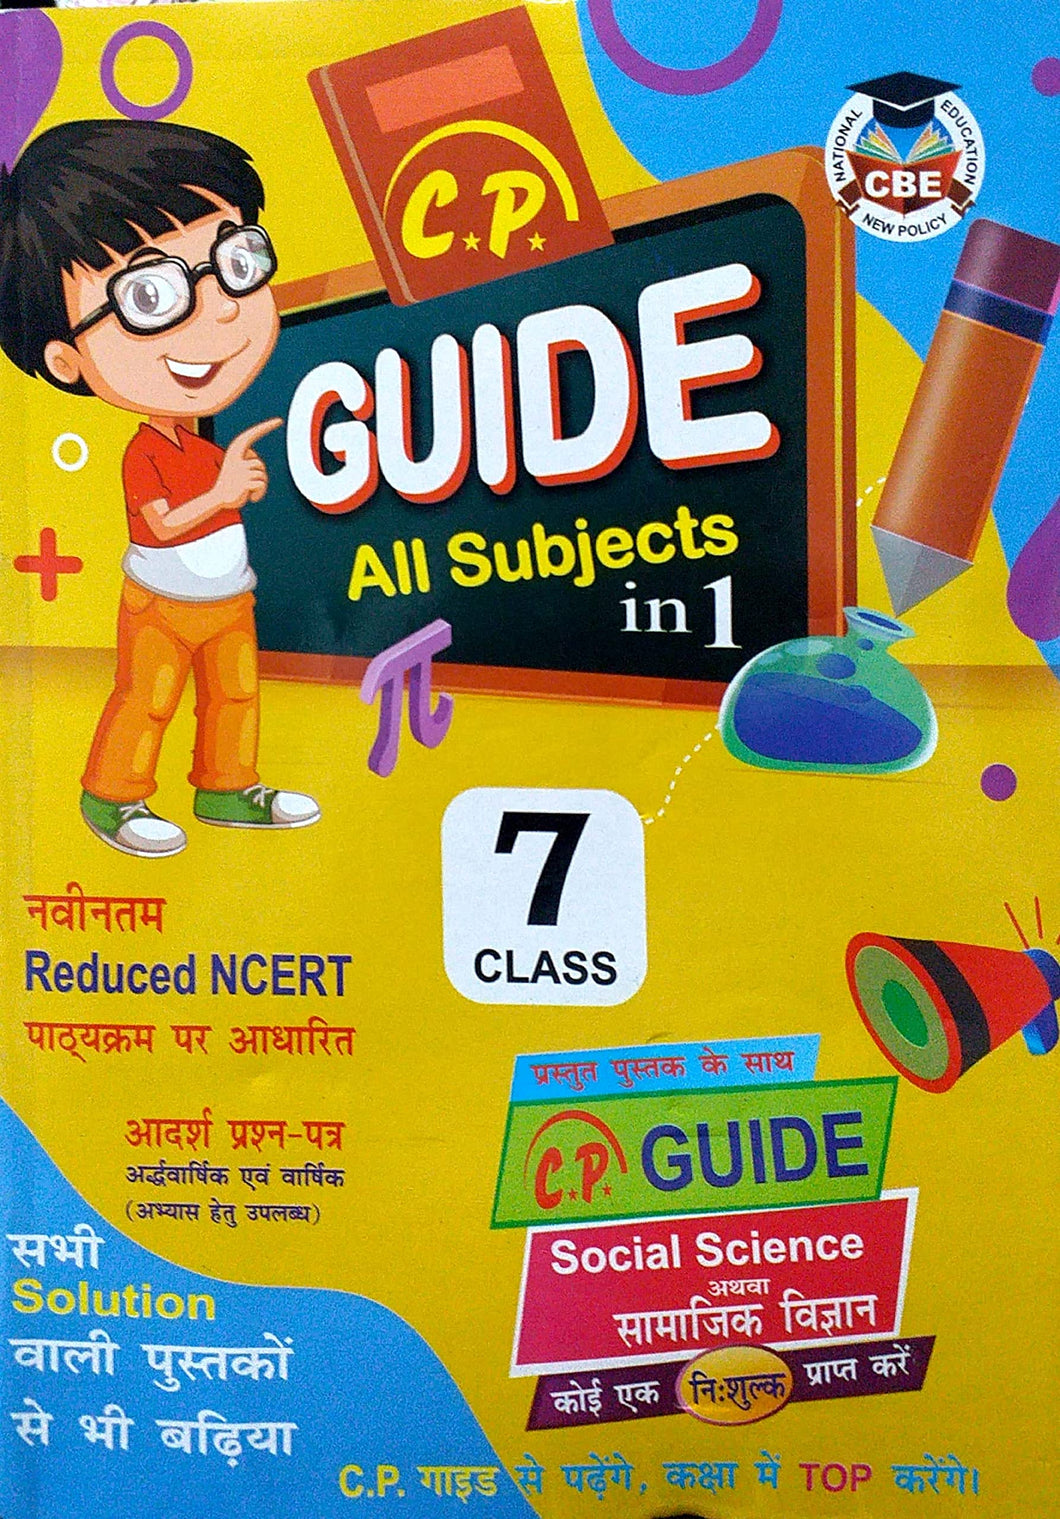 Class 7 Digest/Solution/Guide for all subjects Based On Latest NCERT Curriculum